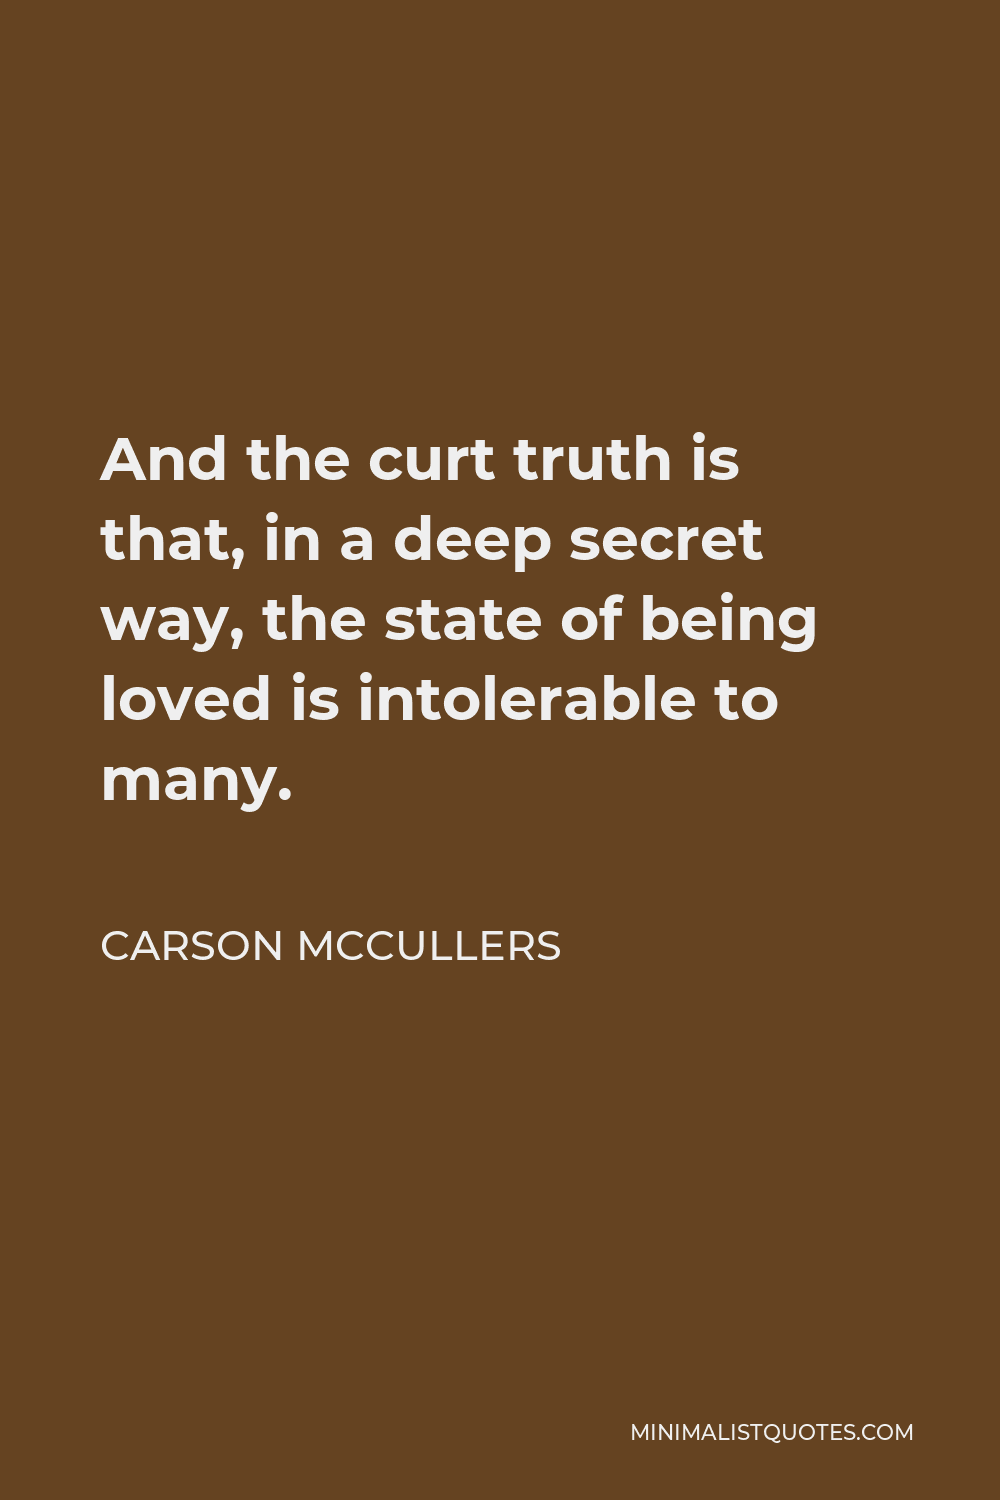 Carson McCullers Quote - And the curt truth is that, in a deep secret way, the state of being loved is intolerable to many.